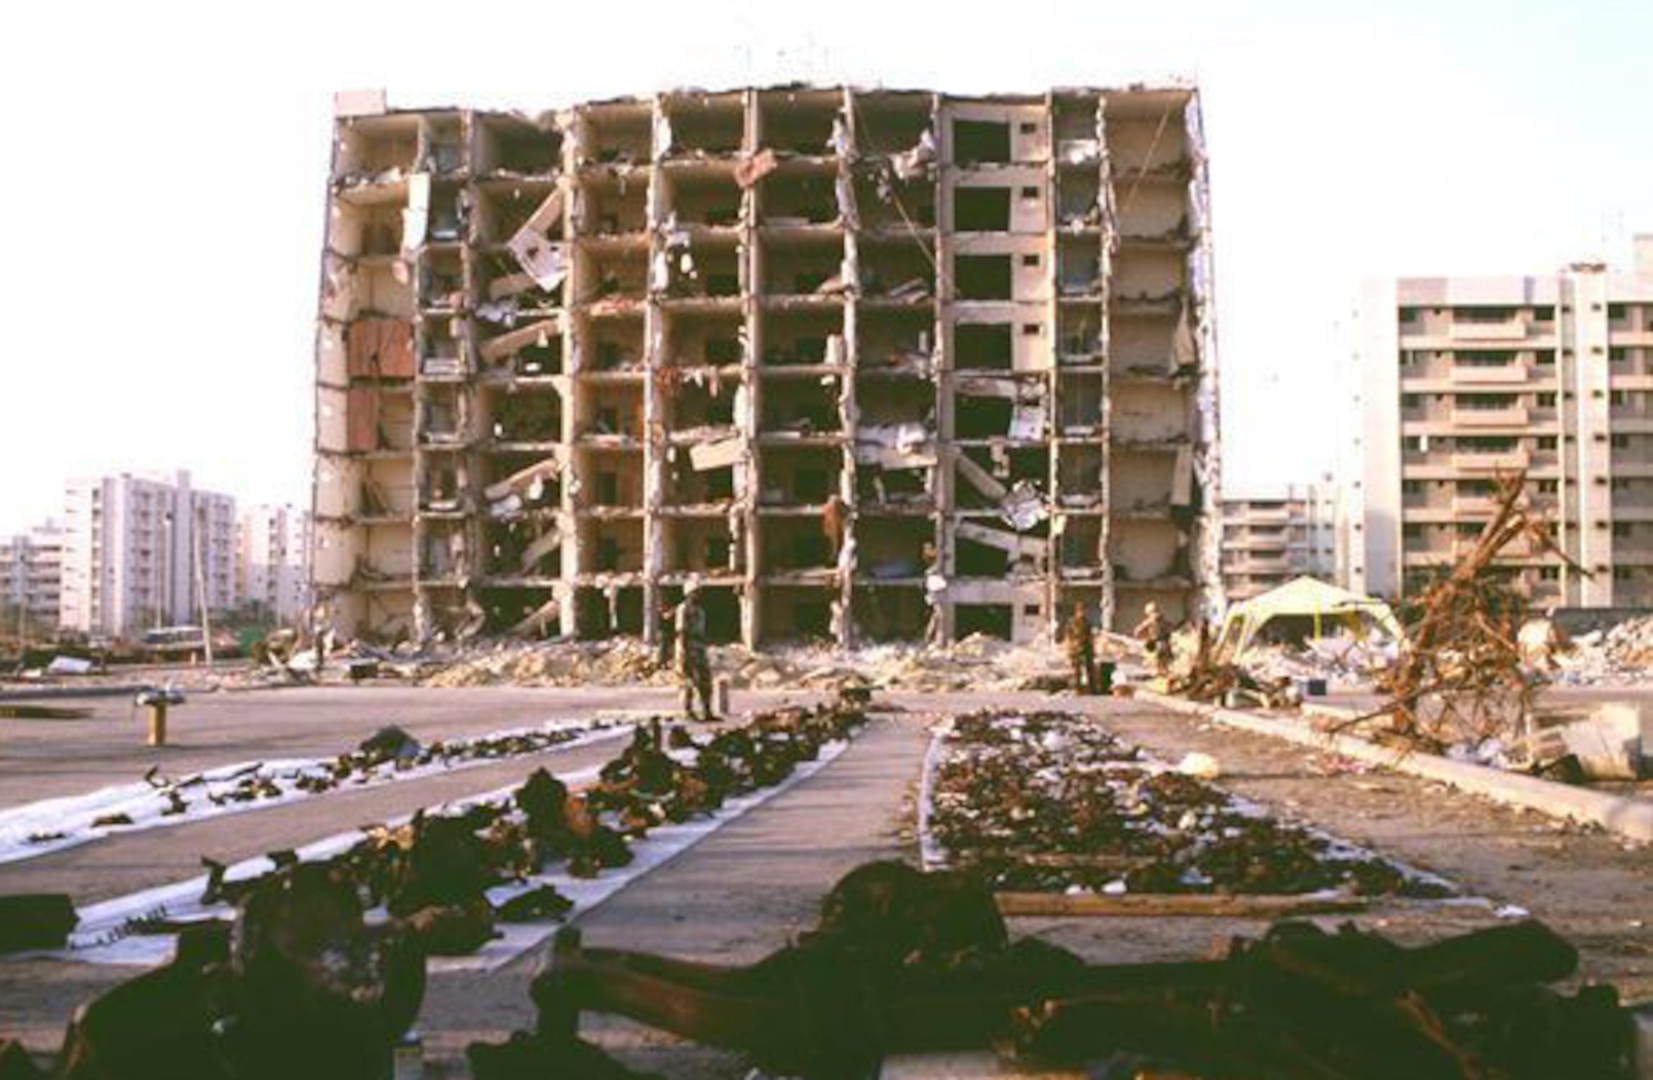 Terrorist attacked the Khobar Towers housing complex June 25, 1996, using a vehicle-borne improvised explosive device. The attacked killed 19 people, including many U.S. military members, and injured countless others.